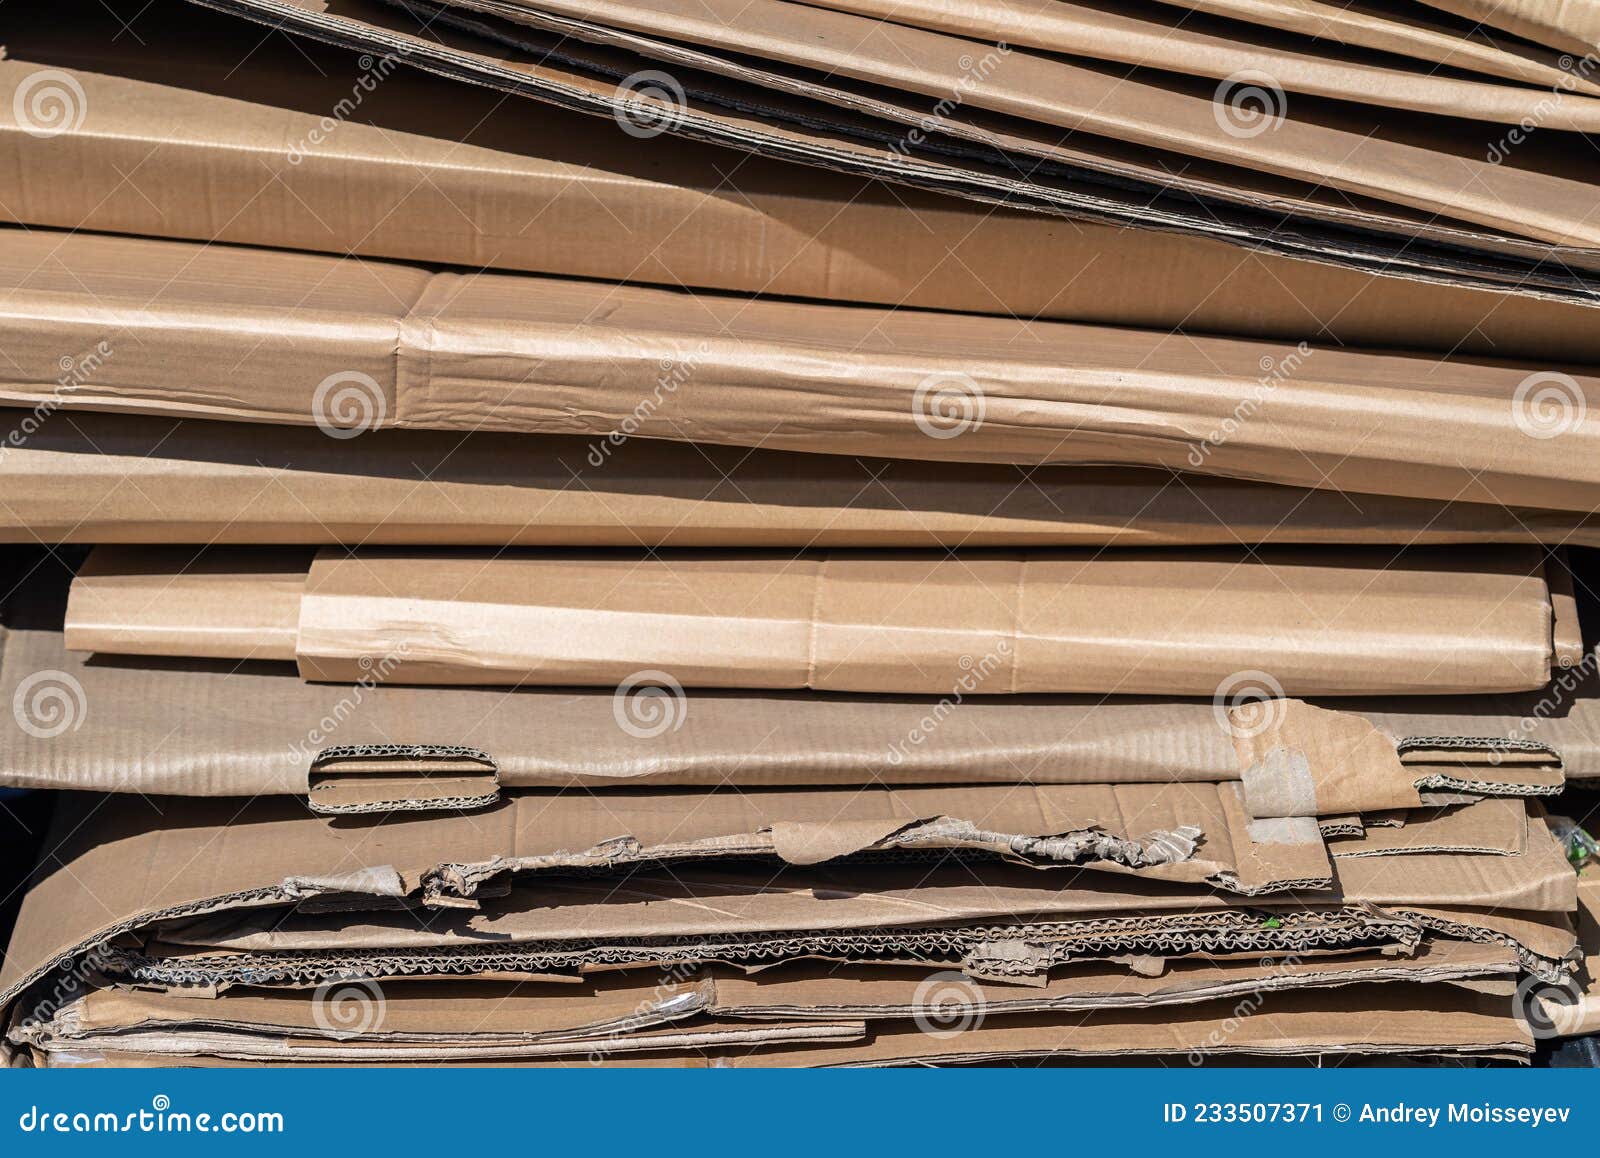 flattened cardboard boxes ready for recycling